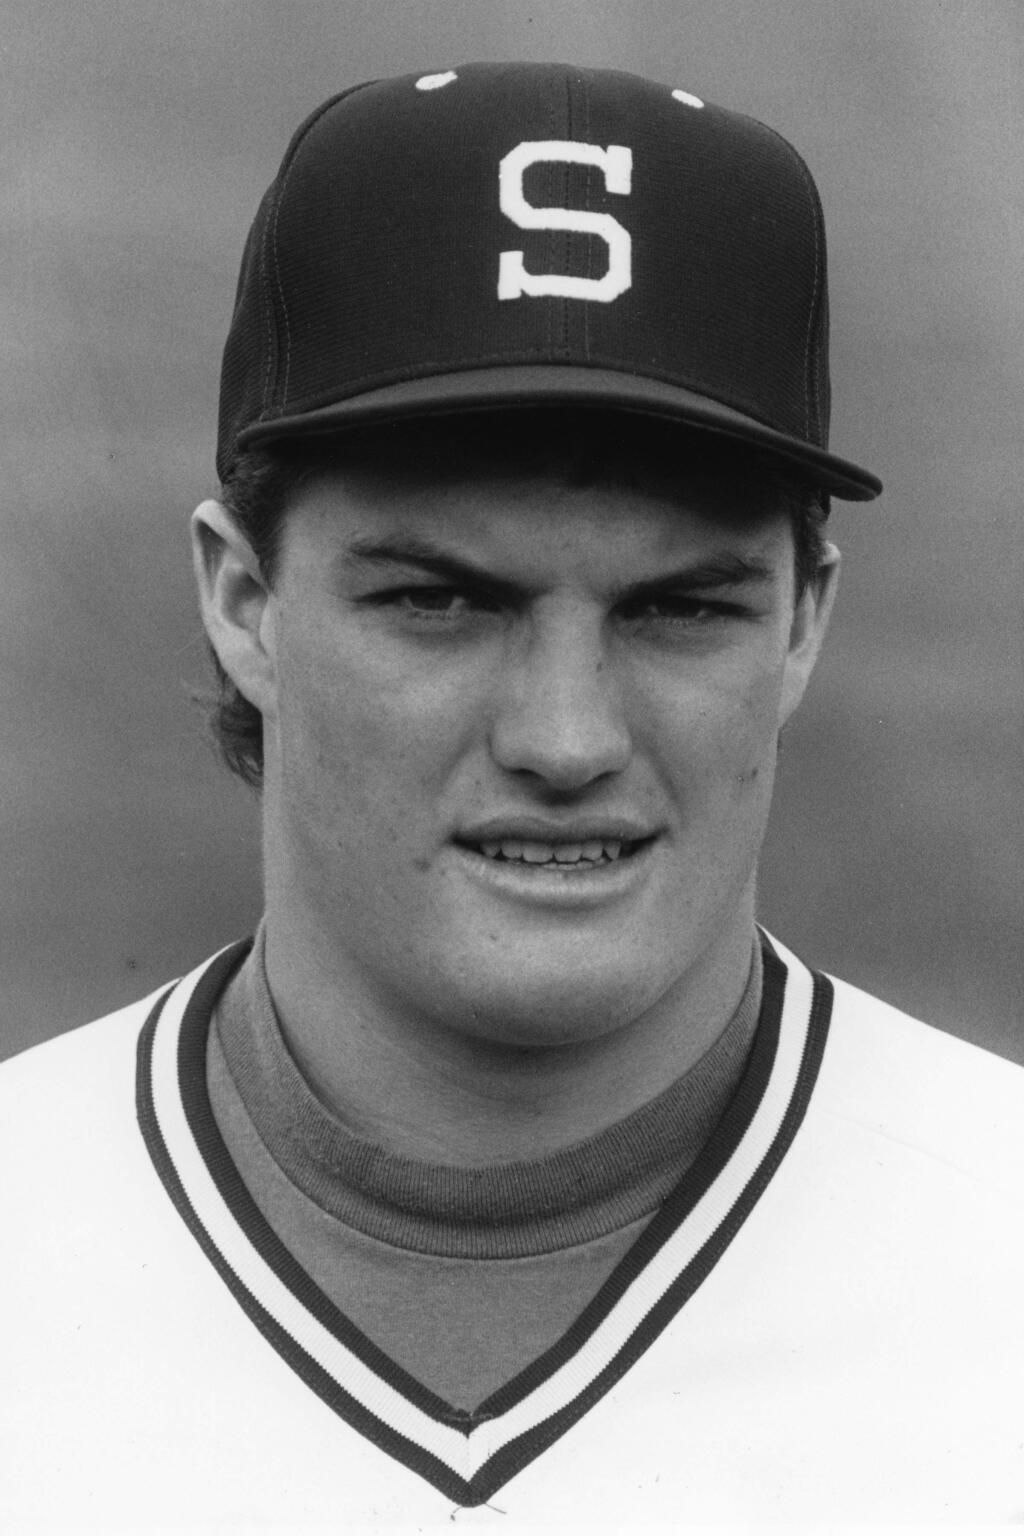 John Lynch during his playing days at Stanford in the early 1990s. (Courtesy photo)